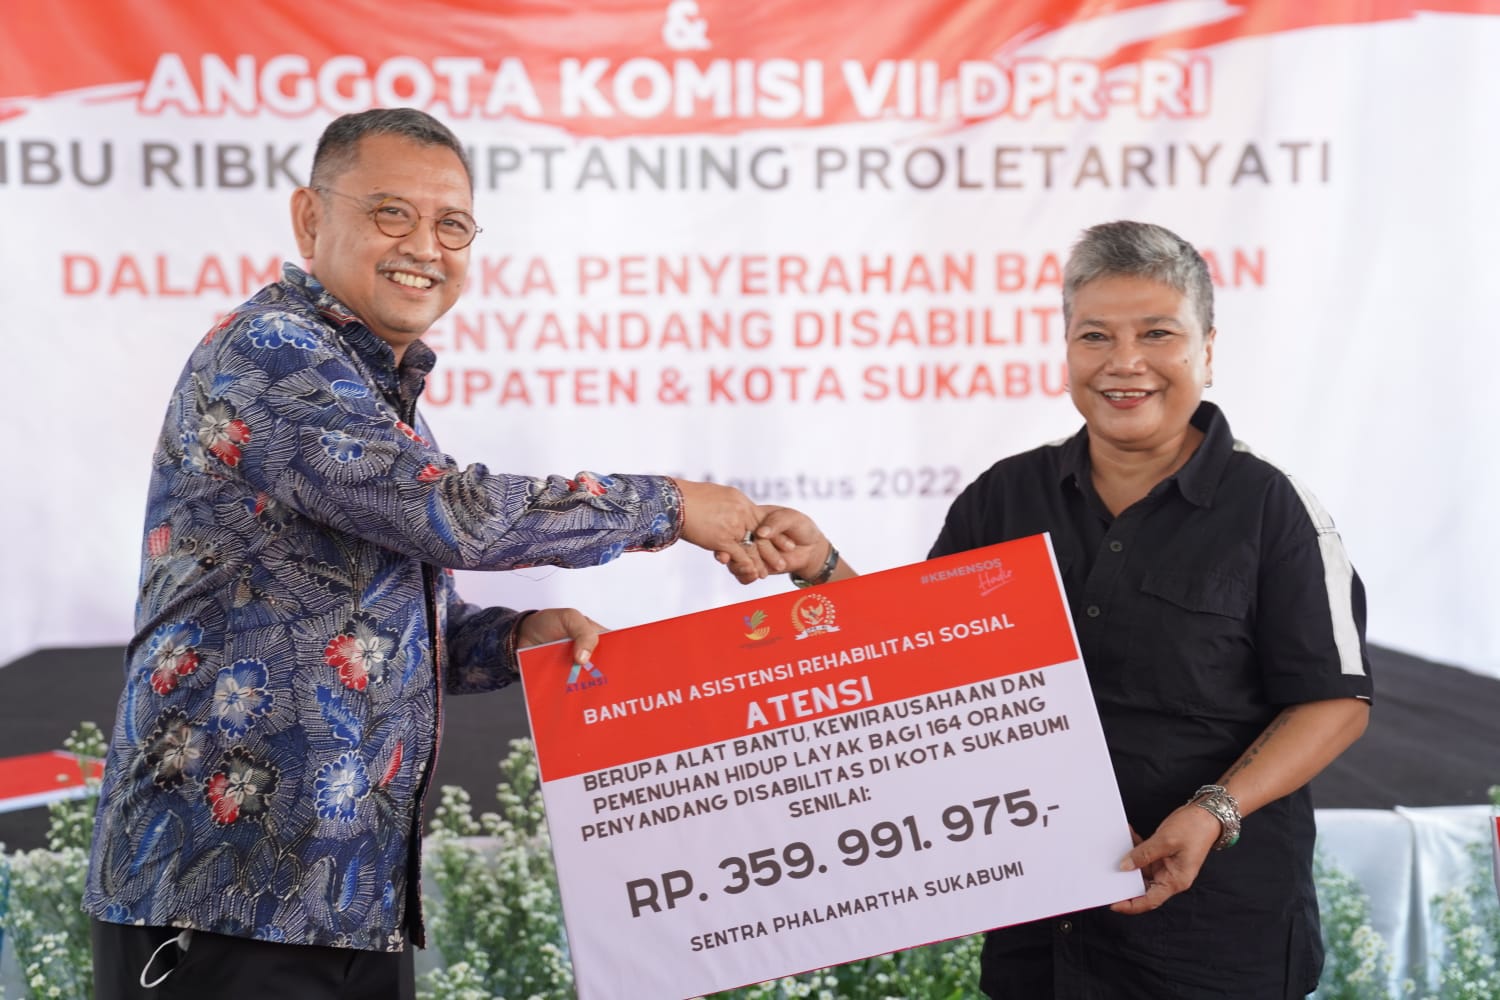 Ribka Tjiptaning: Proud to Laugh, Cry and Guard Social Assistance on Target